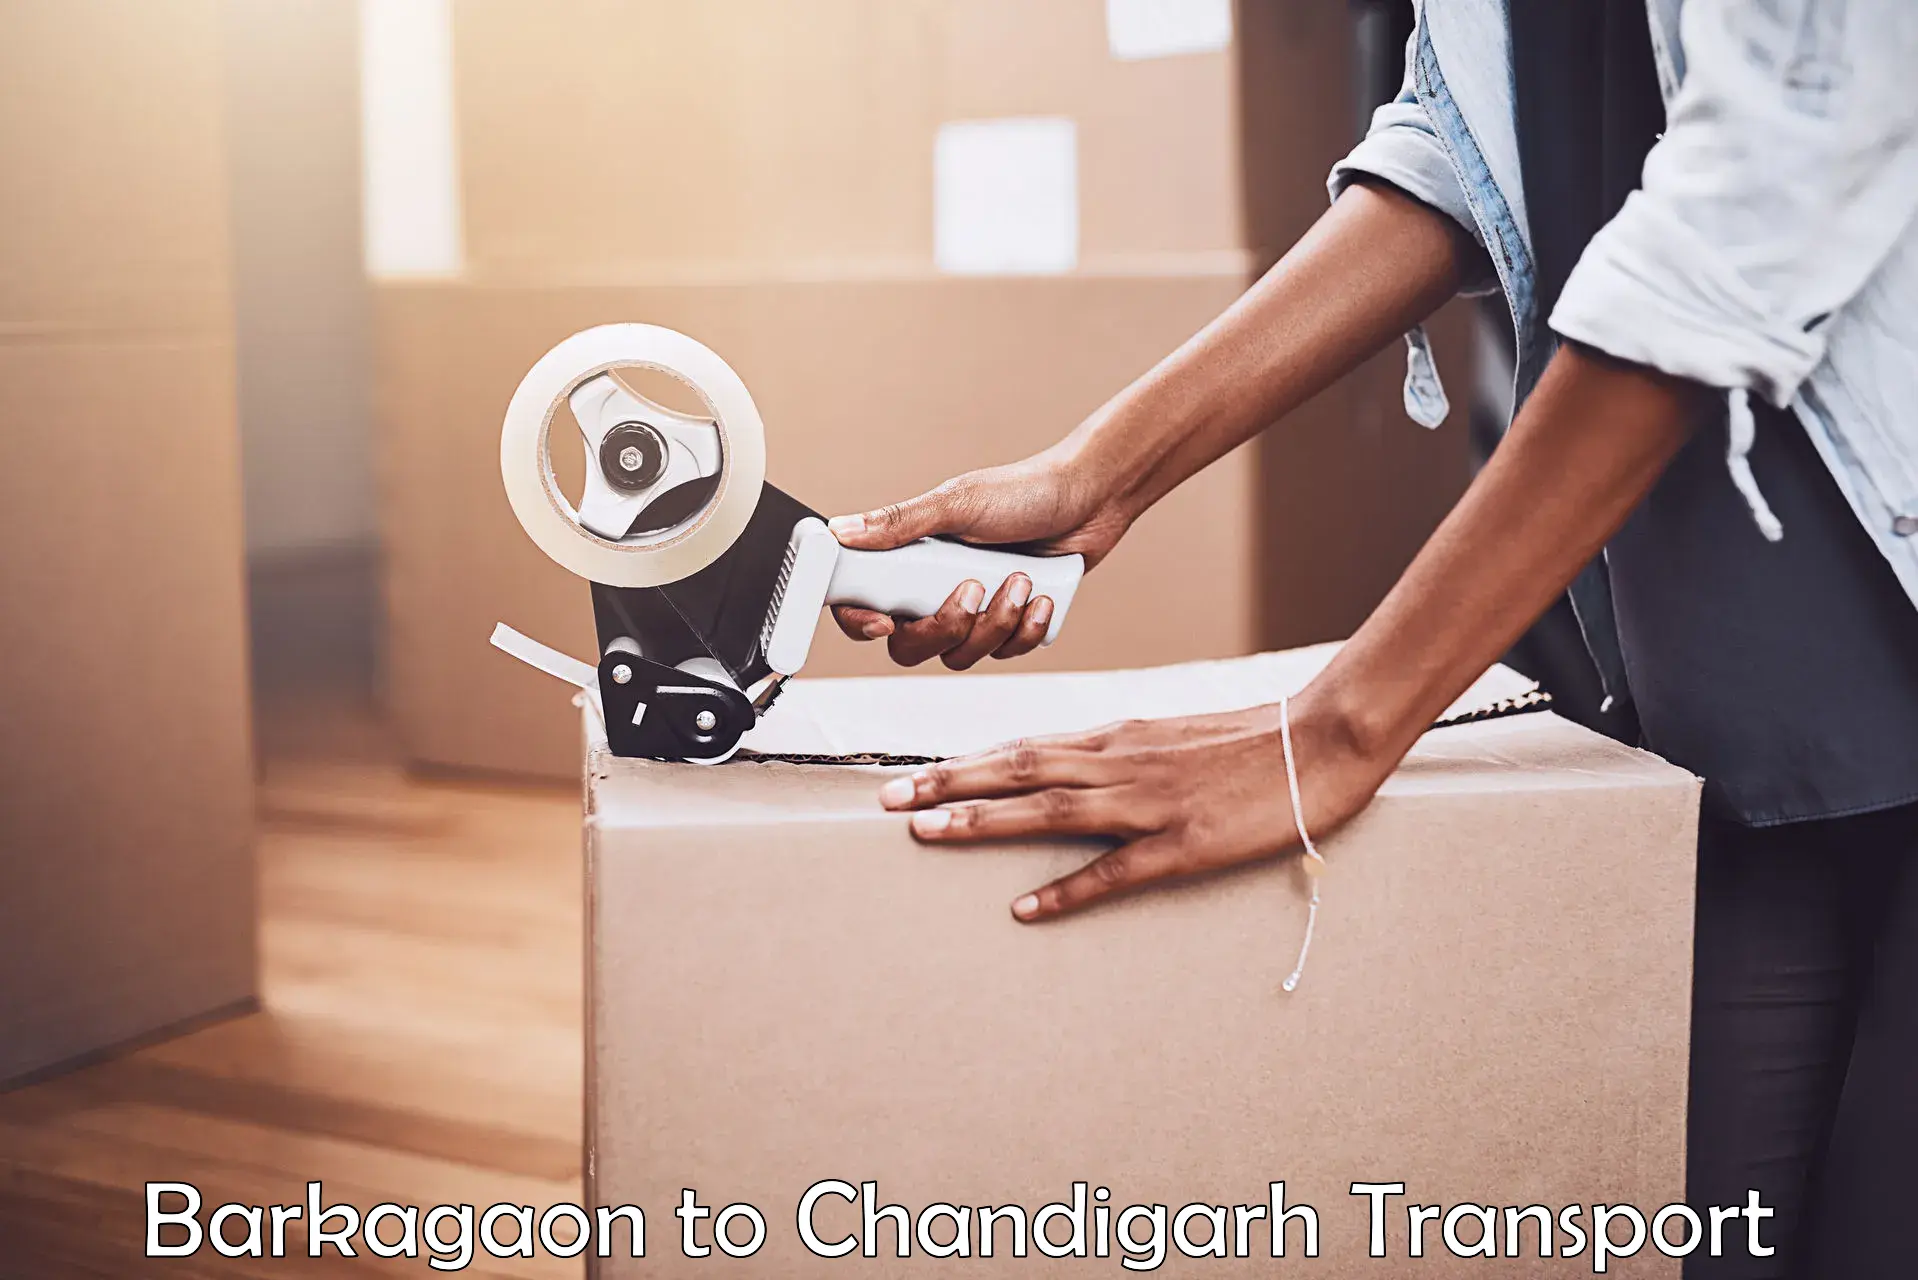 Delivery service Barkagaon to Chandigarh